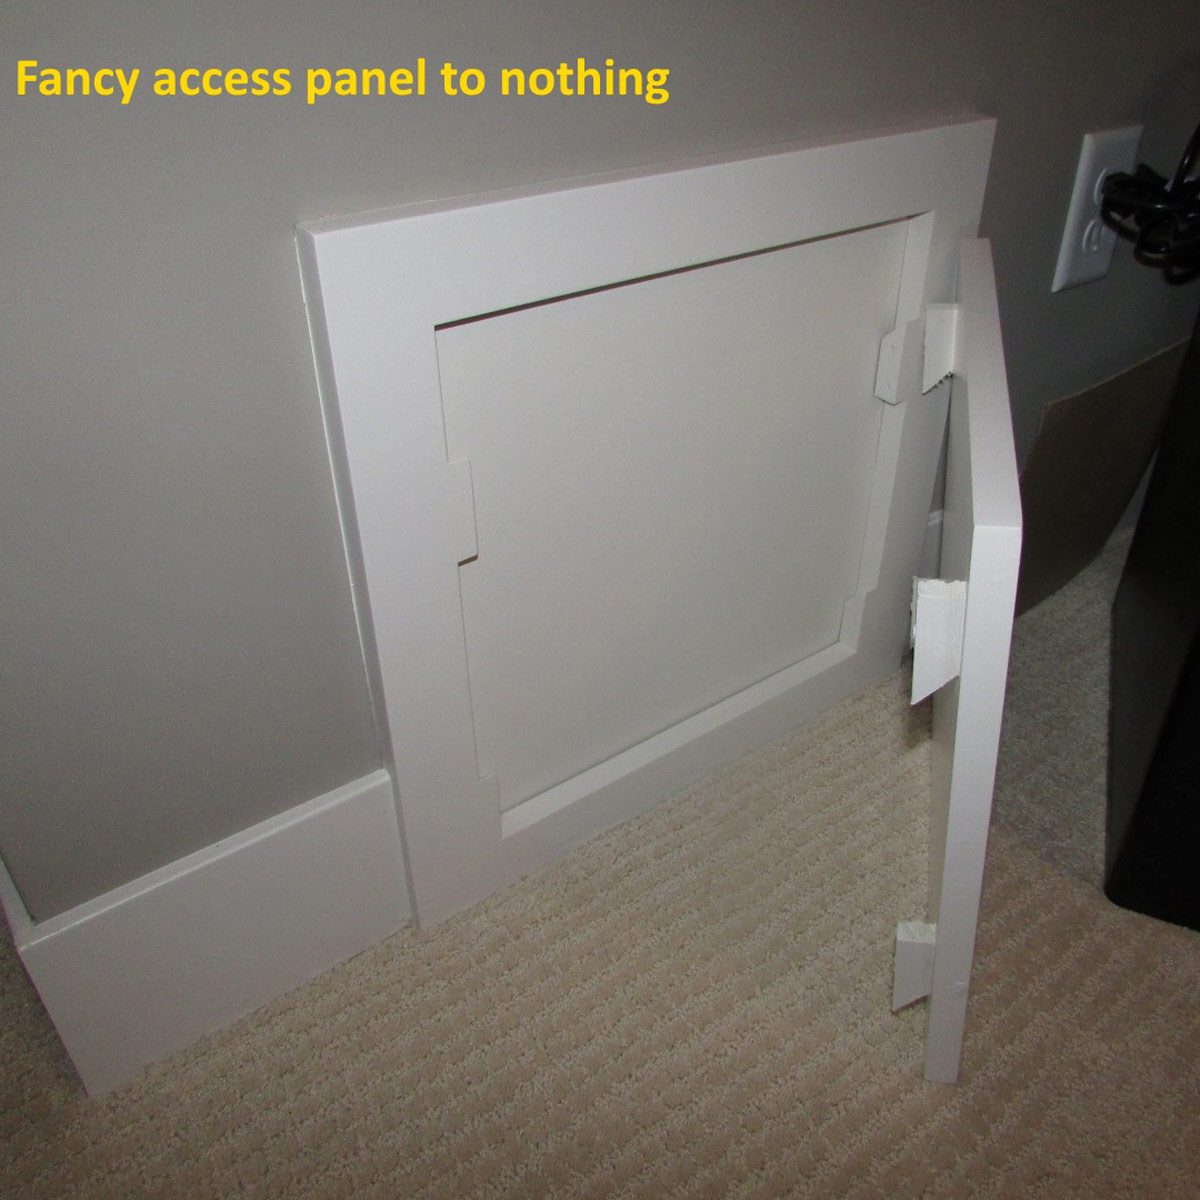 Fancy access panel to nothing